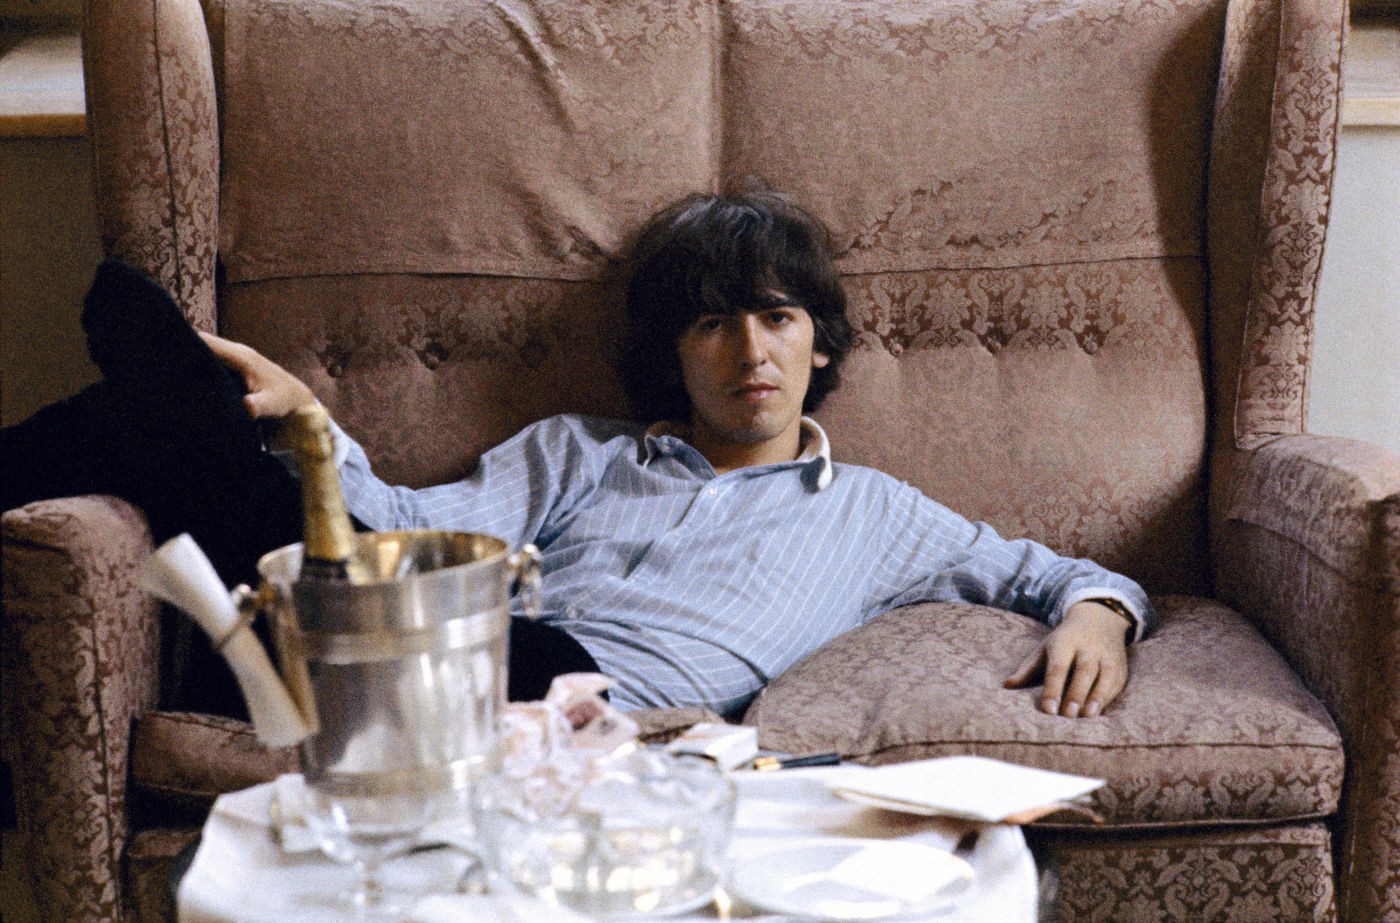 George Harrison stars as Himself in HBO's George Harrison: Living in the Material World (2011)